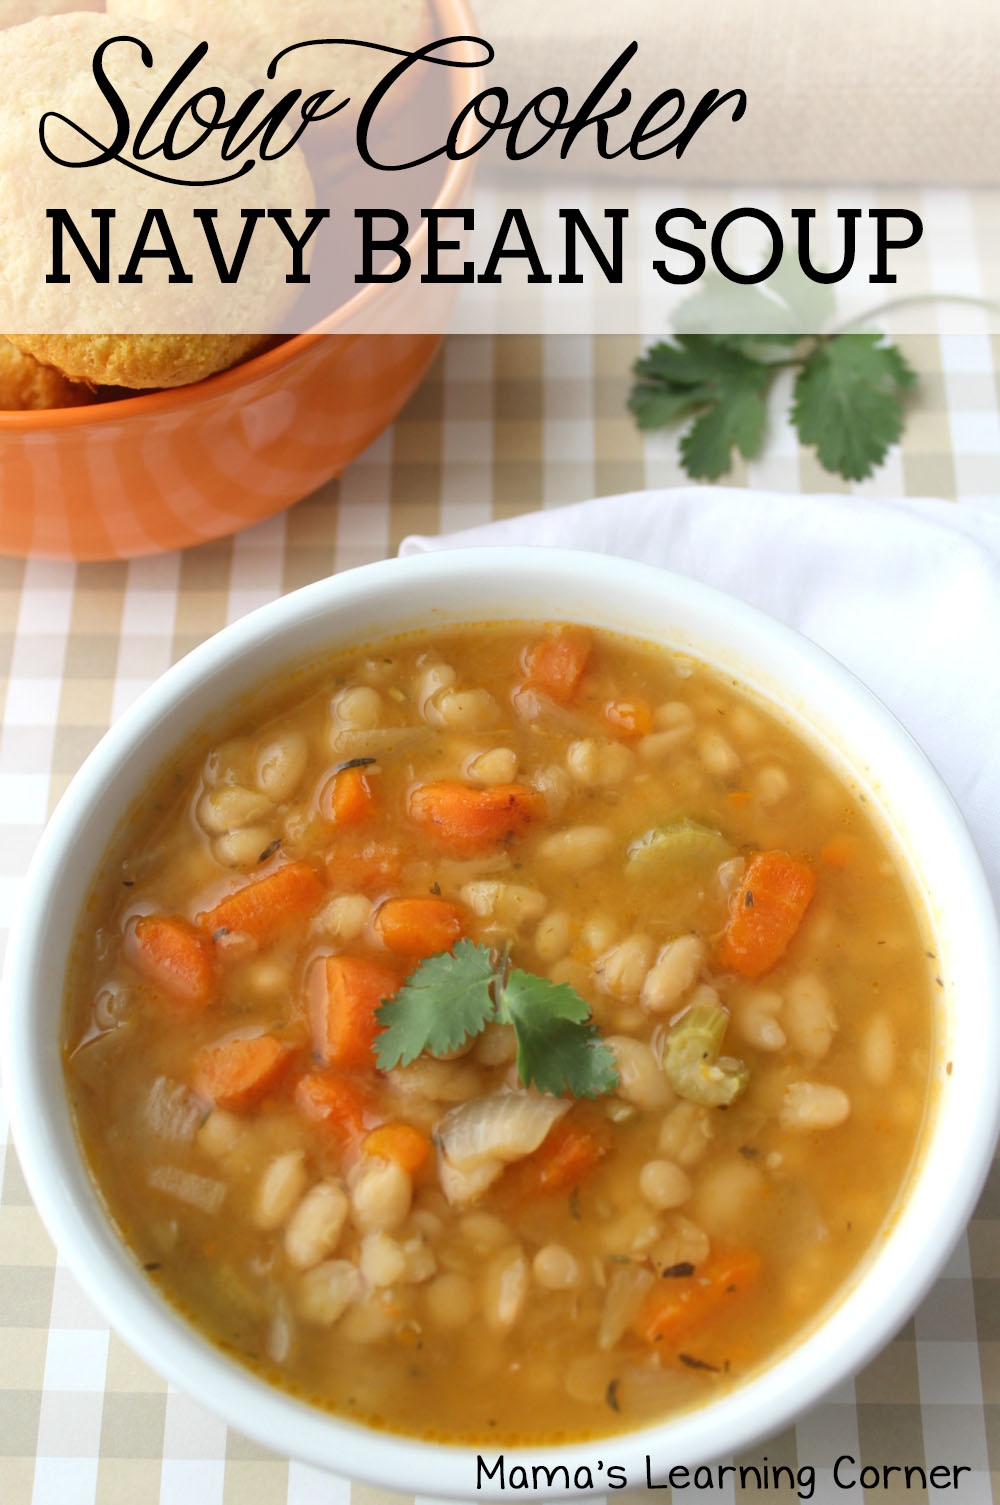 Slow Cooker Navy Bean Soup - and it's gluten free! - Mamas Learning Corner